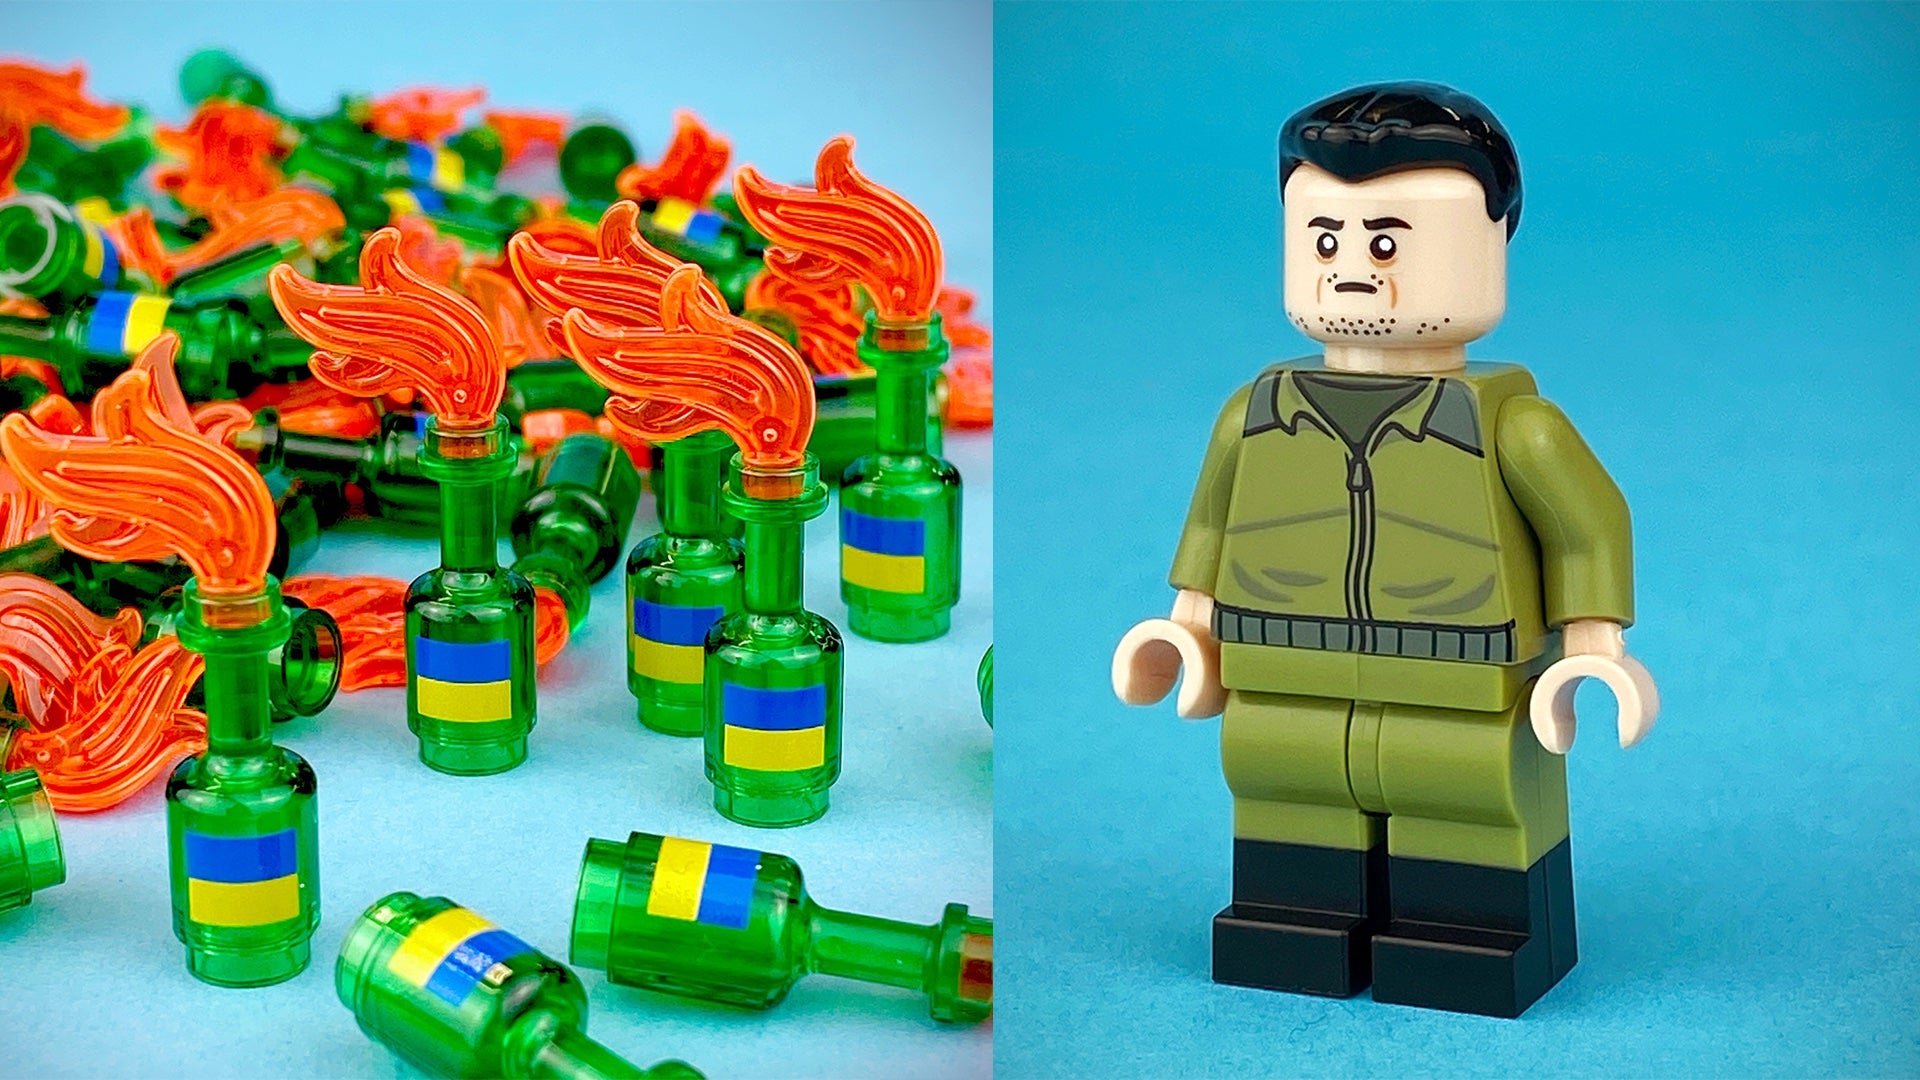 These Molotov cocktail Legos raised more than $16,000 for medical aid to Ukraine